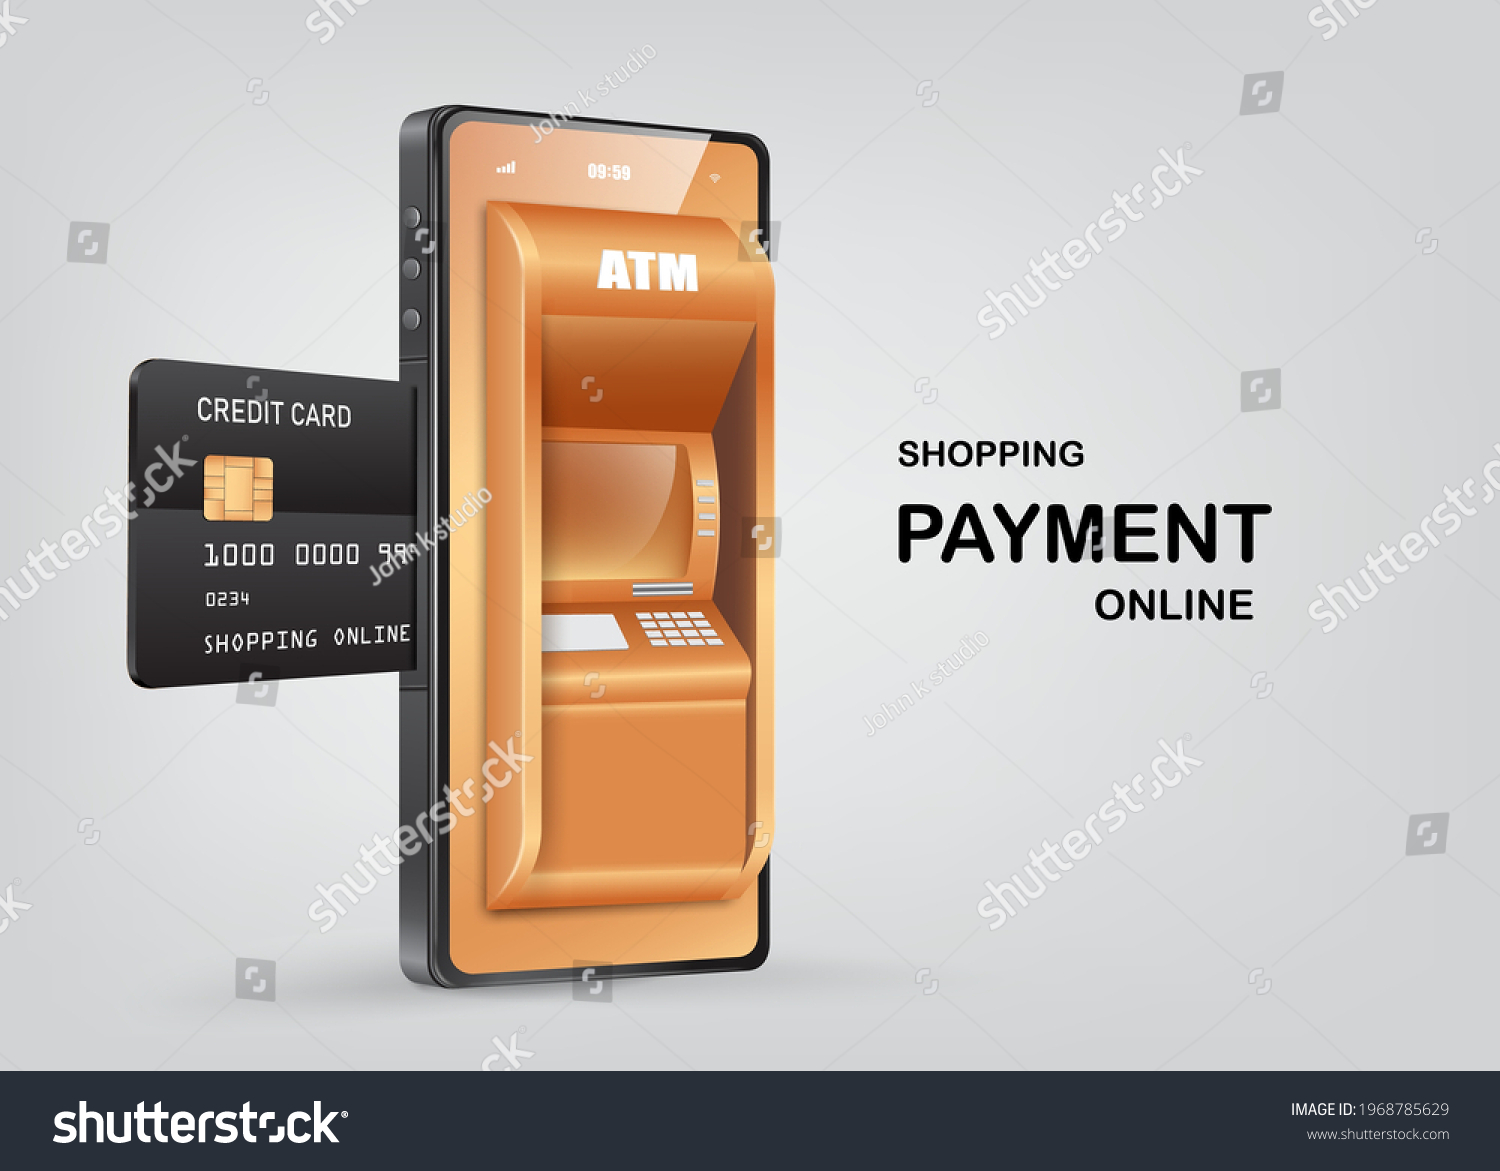 The credit card is inserted into the slot of the ATM machine,shopping for payment online and financial concept design,pay via smartphone application,vector 3d isolated #1968785629